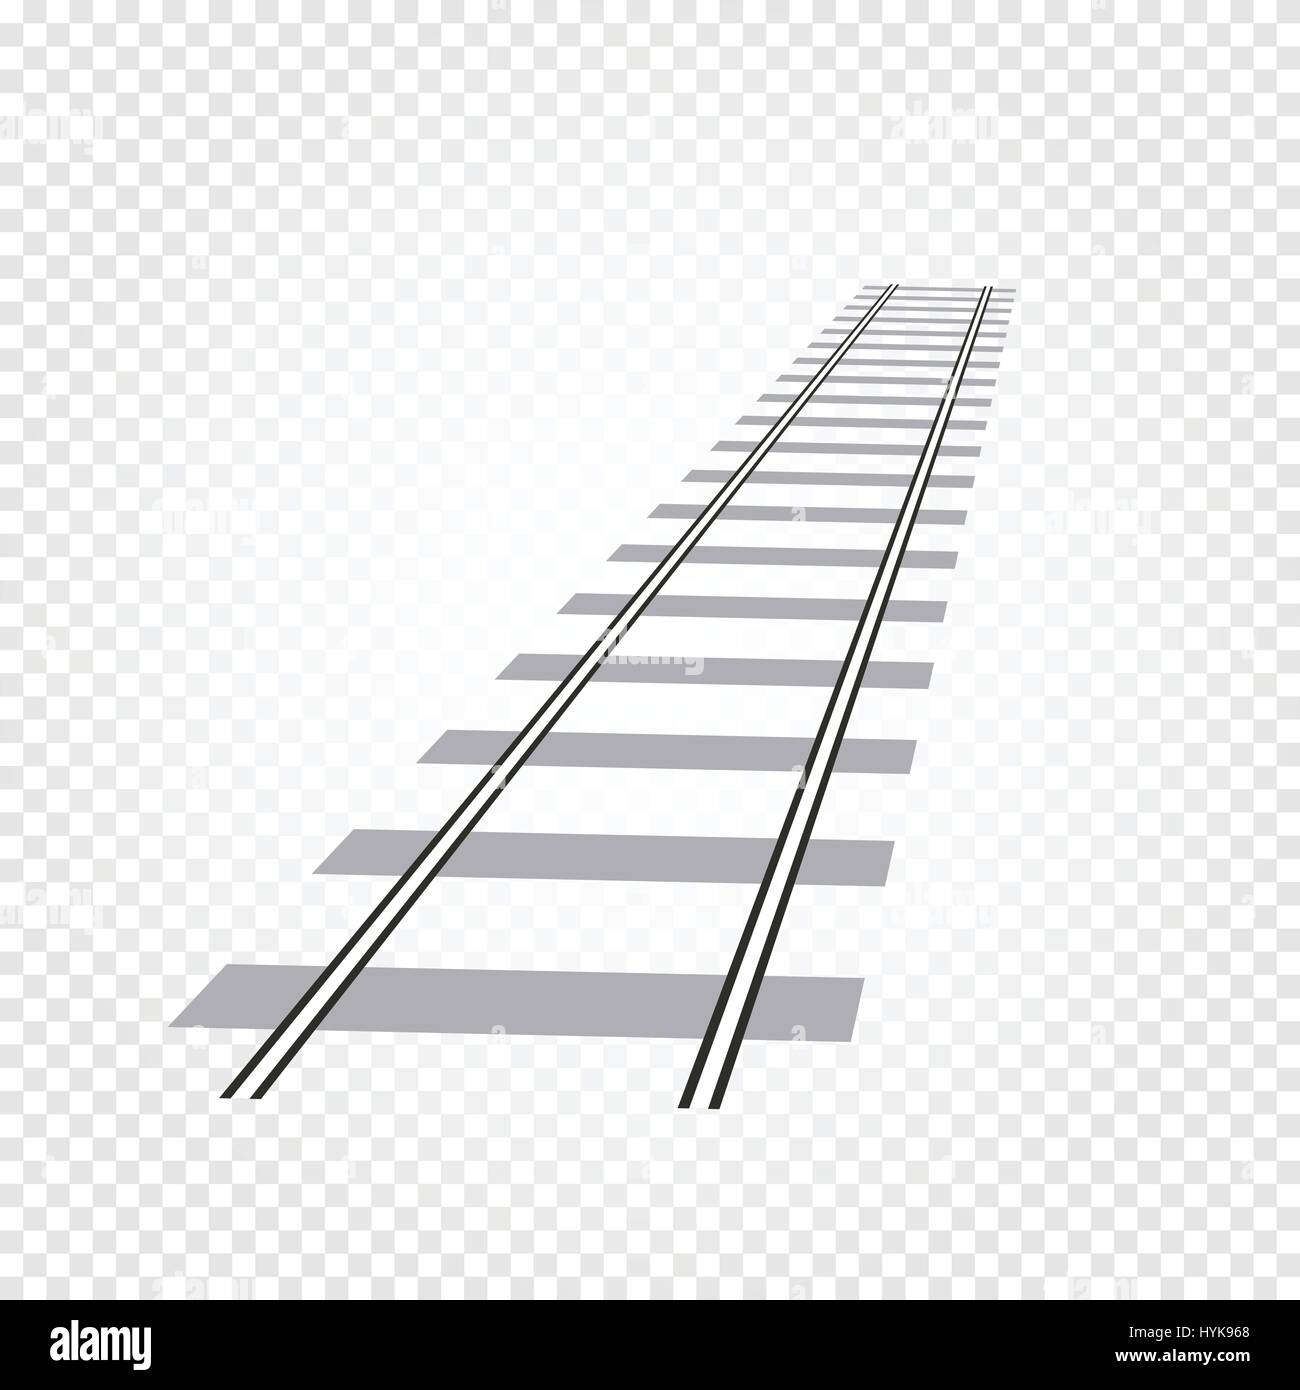 Isolated abstract grey color railway road on checkered background, ladder vector illustration Stock Vector